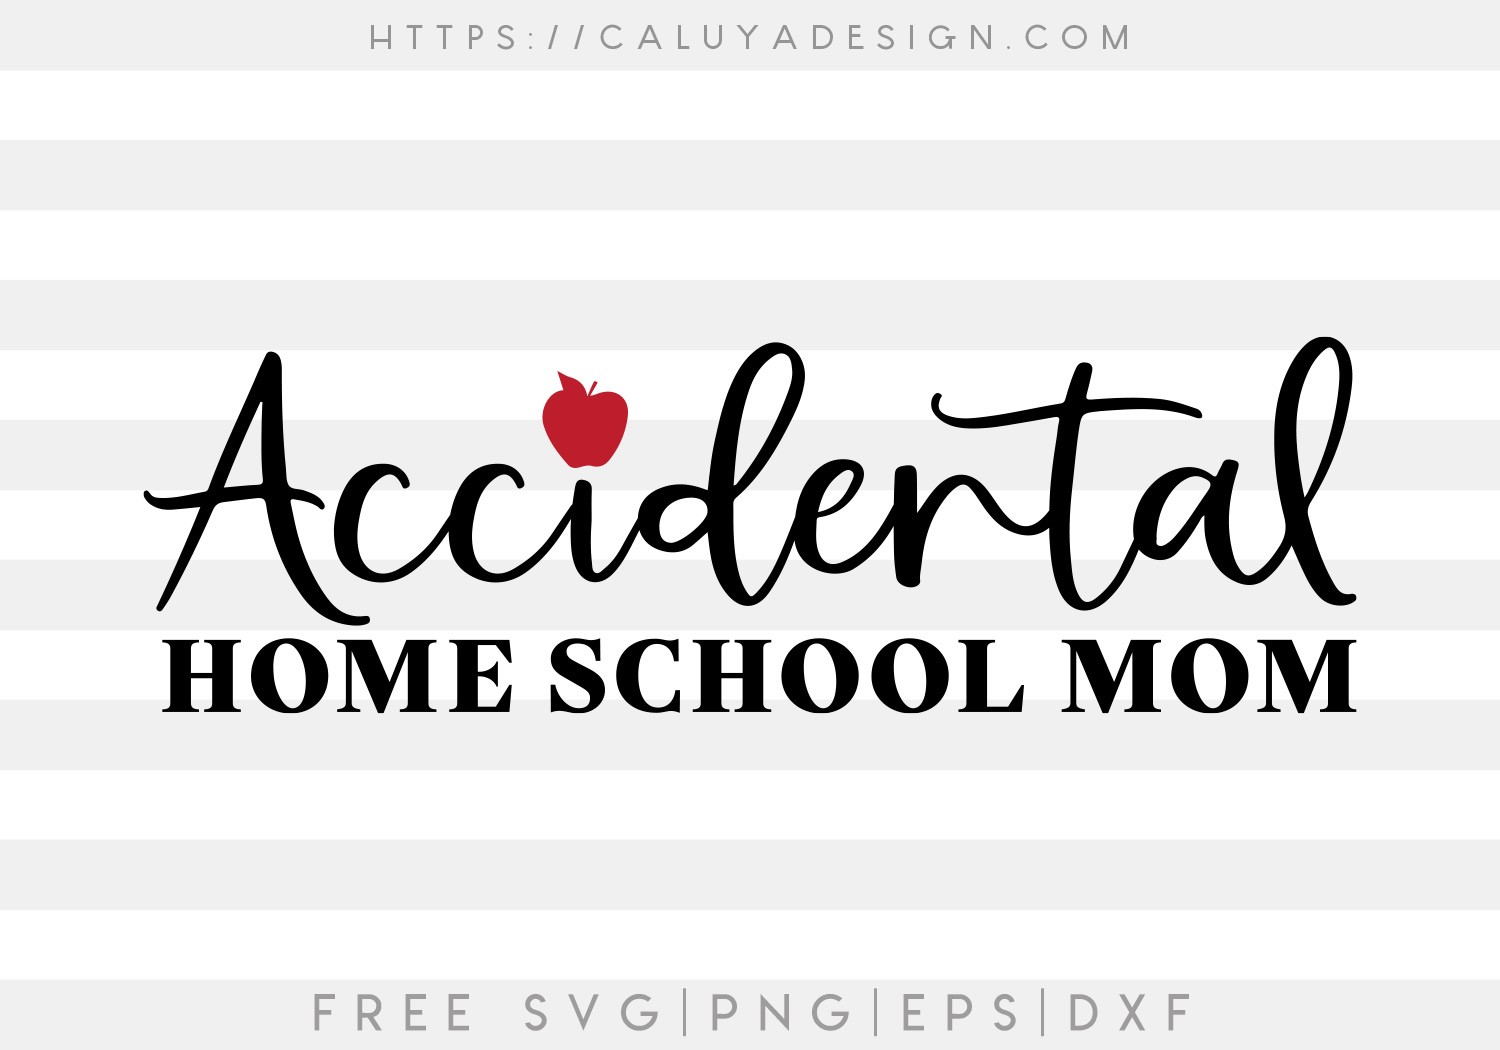 Accidental Homeschool Mom SVG, PNG, EPS & DXF